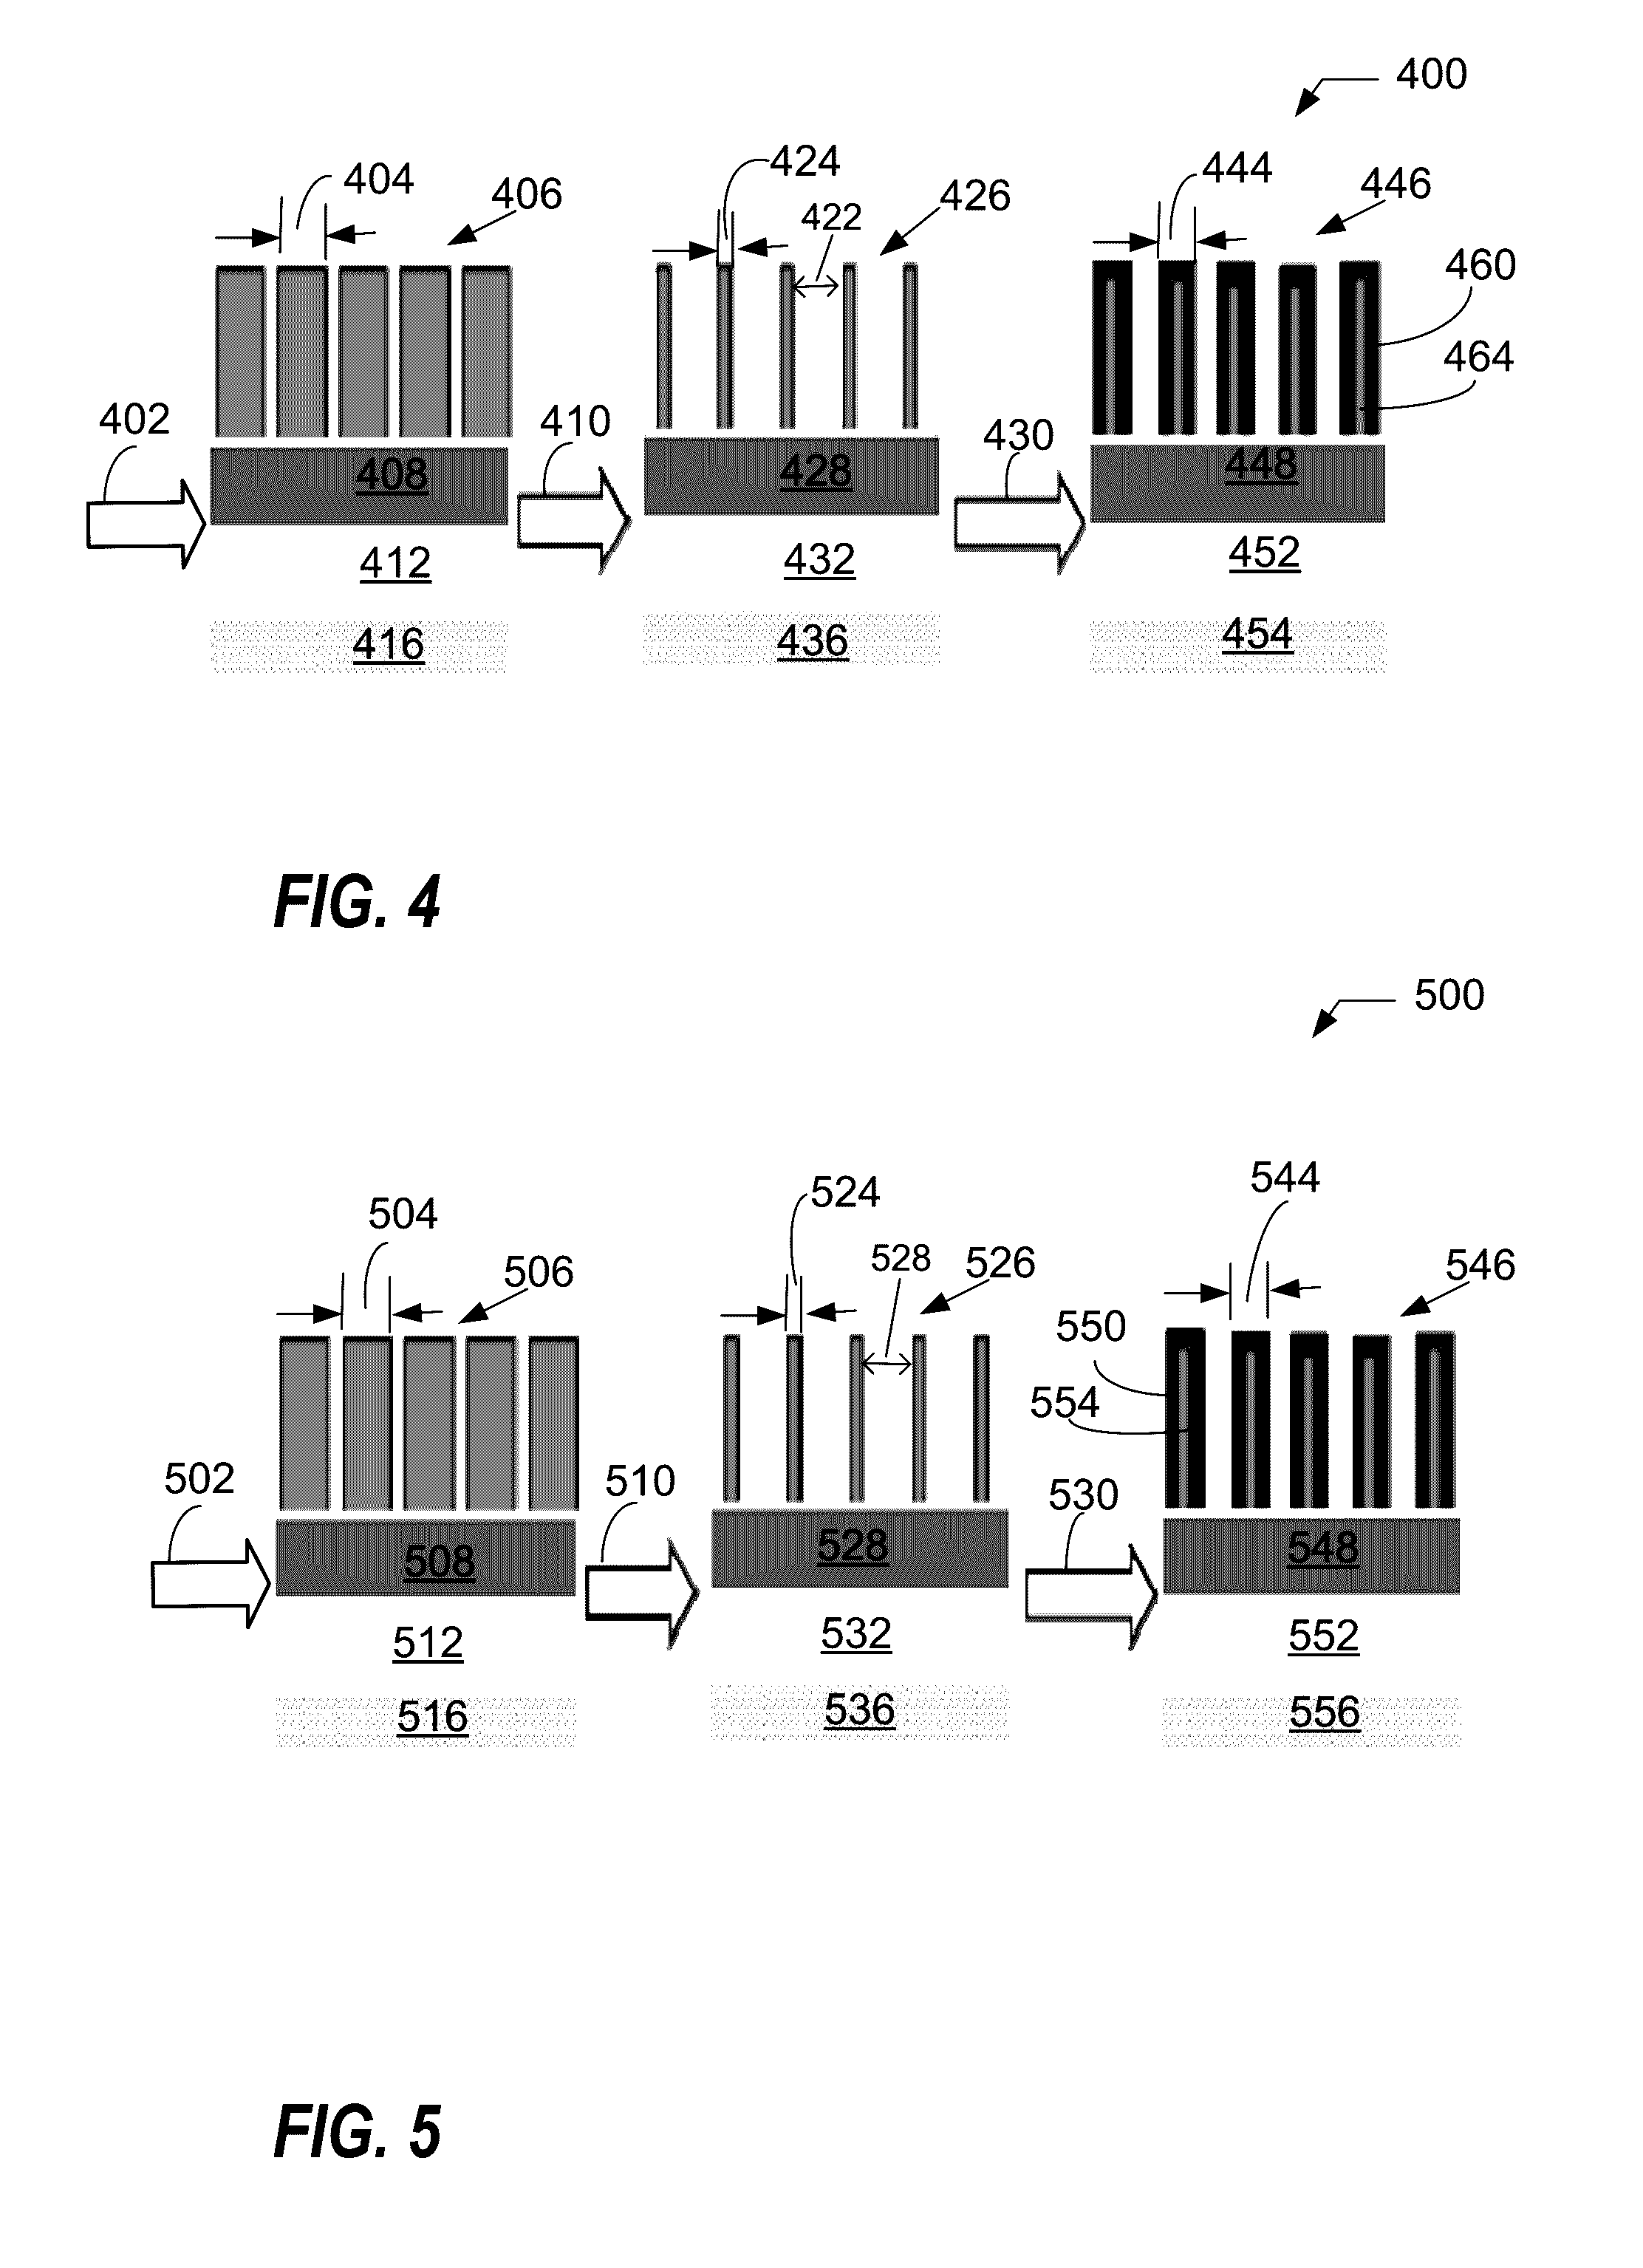 Extreme ultra-violet sensitivity reduction using shrink and growth method